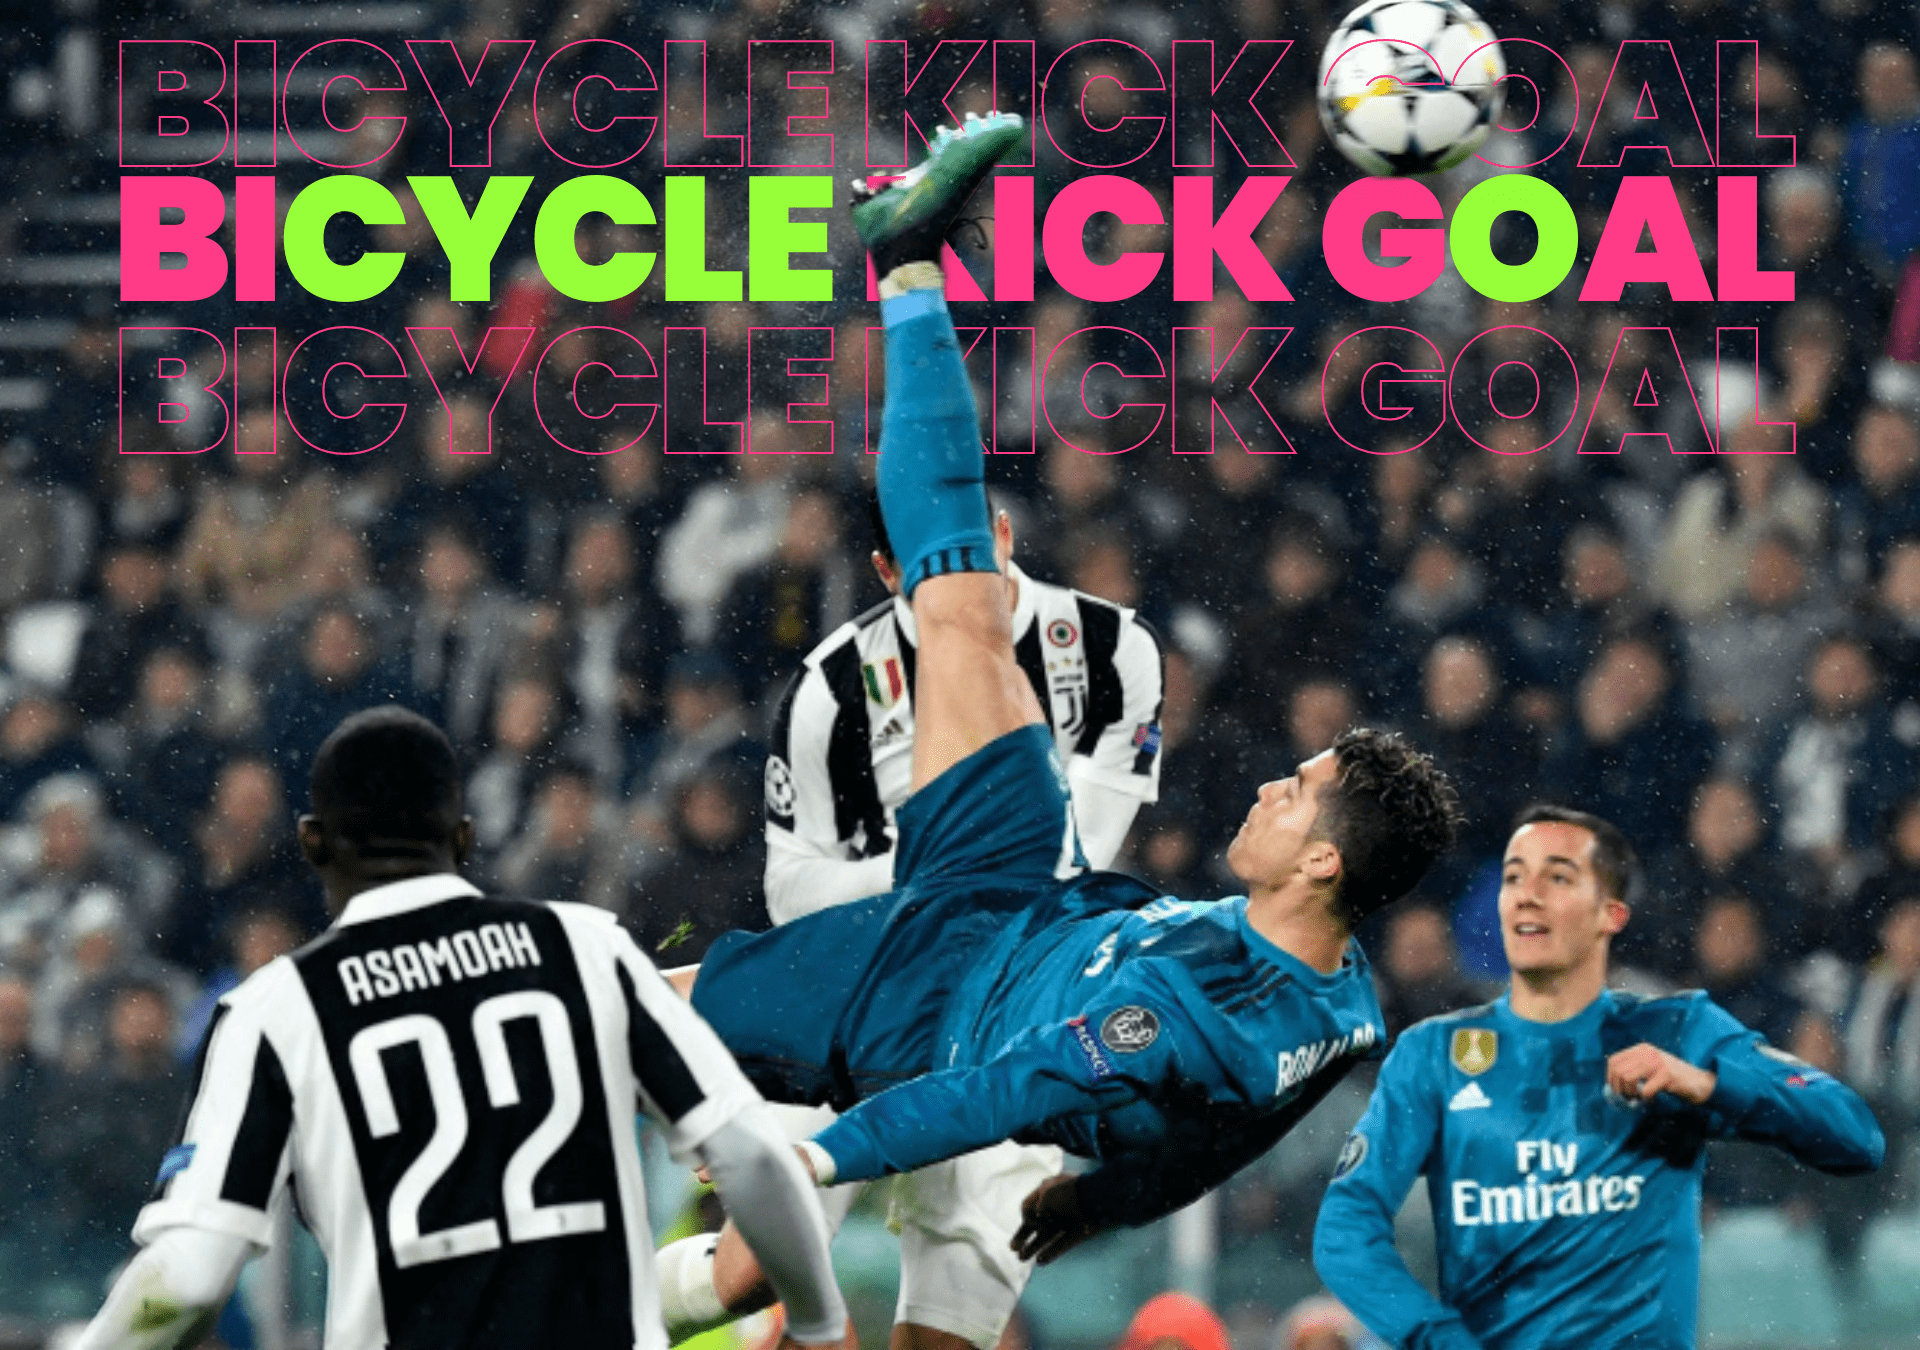 You are currently viewing Cristiano Ronaldo bicycle kick goal at Juventus Stadium